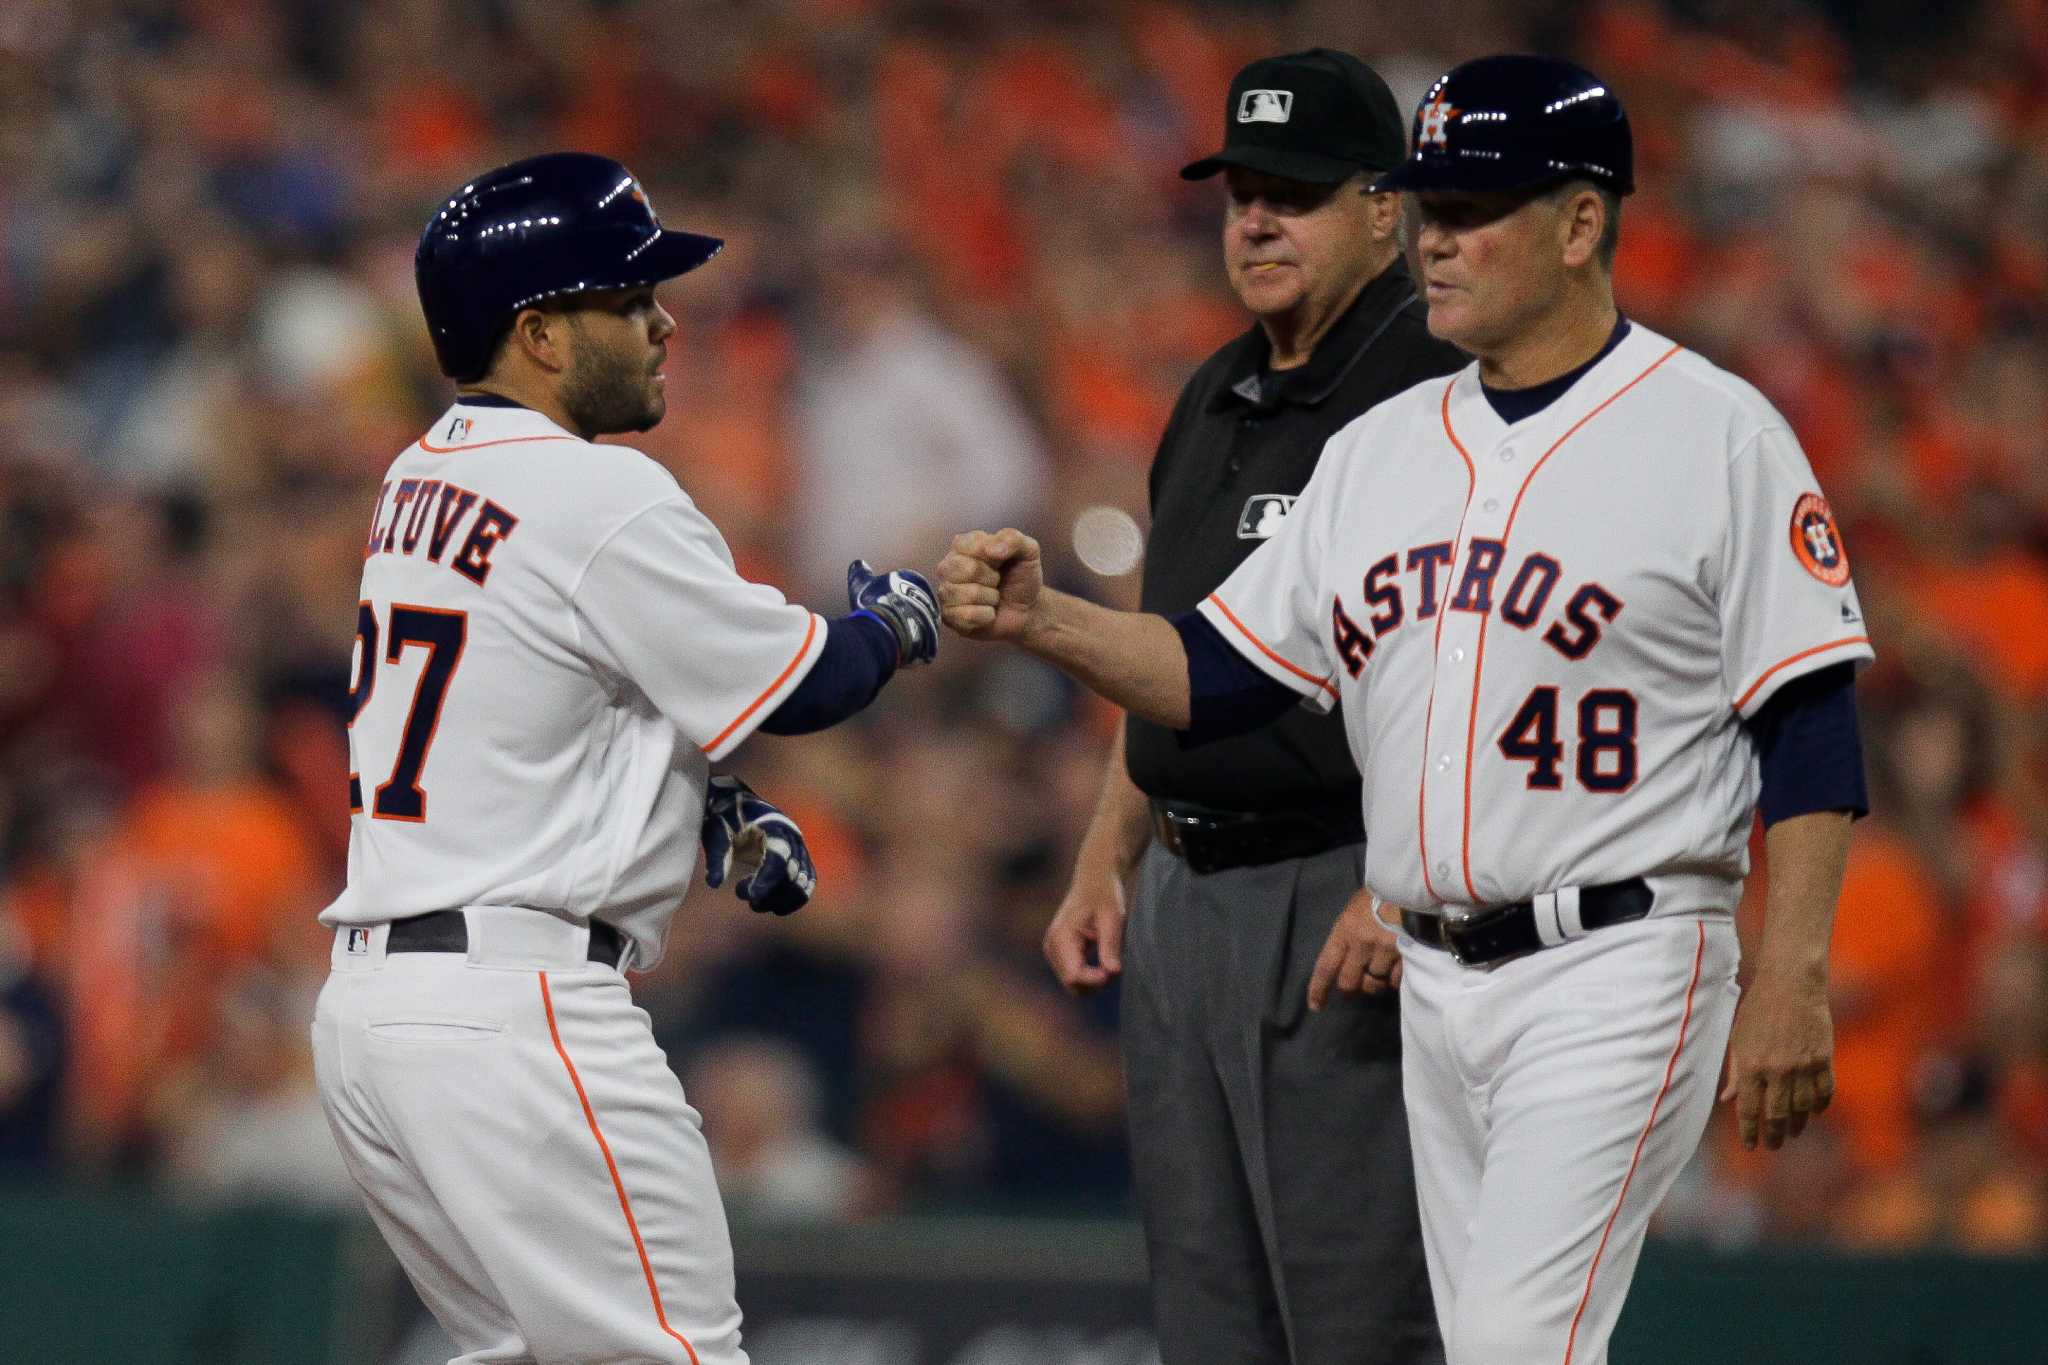 Rich Dauer set to retire Alex Cintron promoted to Astros' first base coach